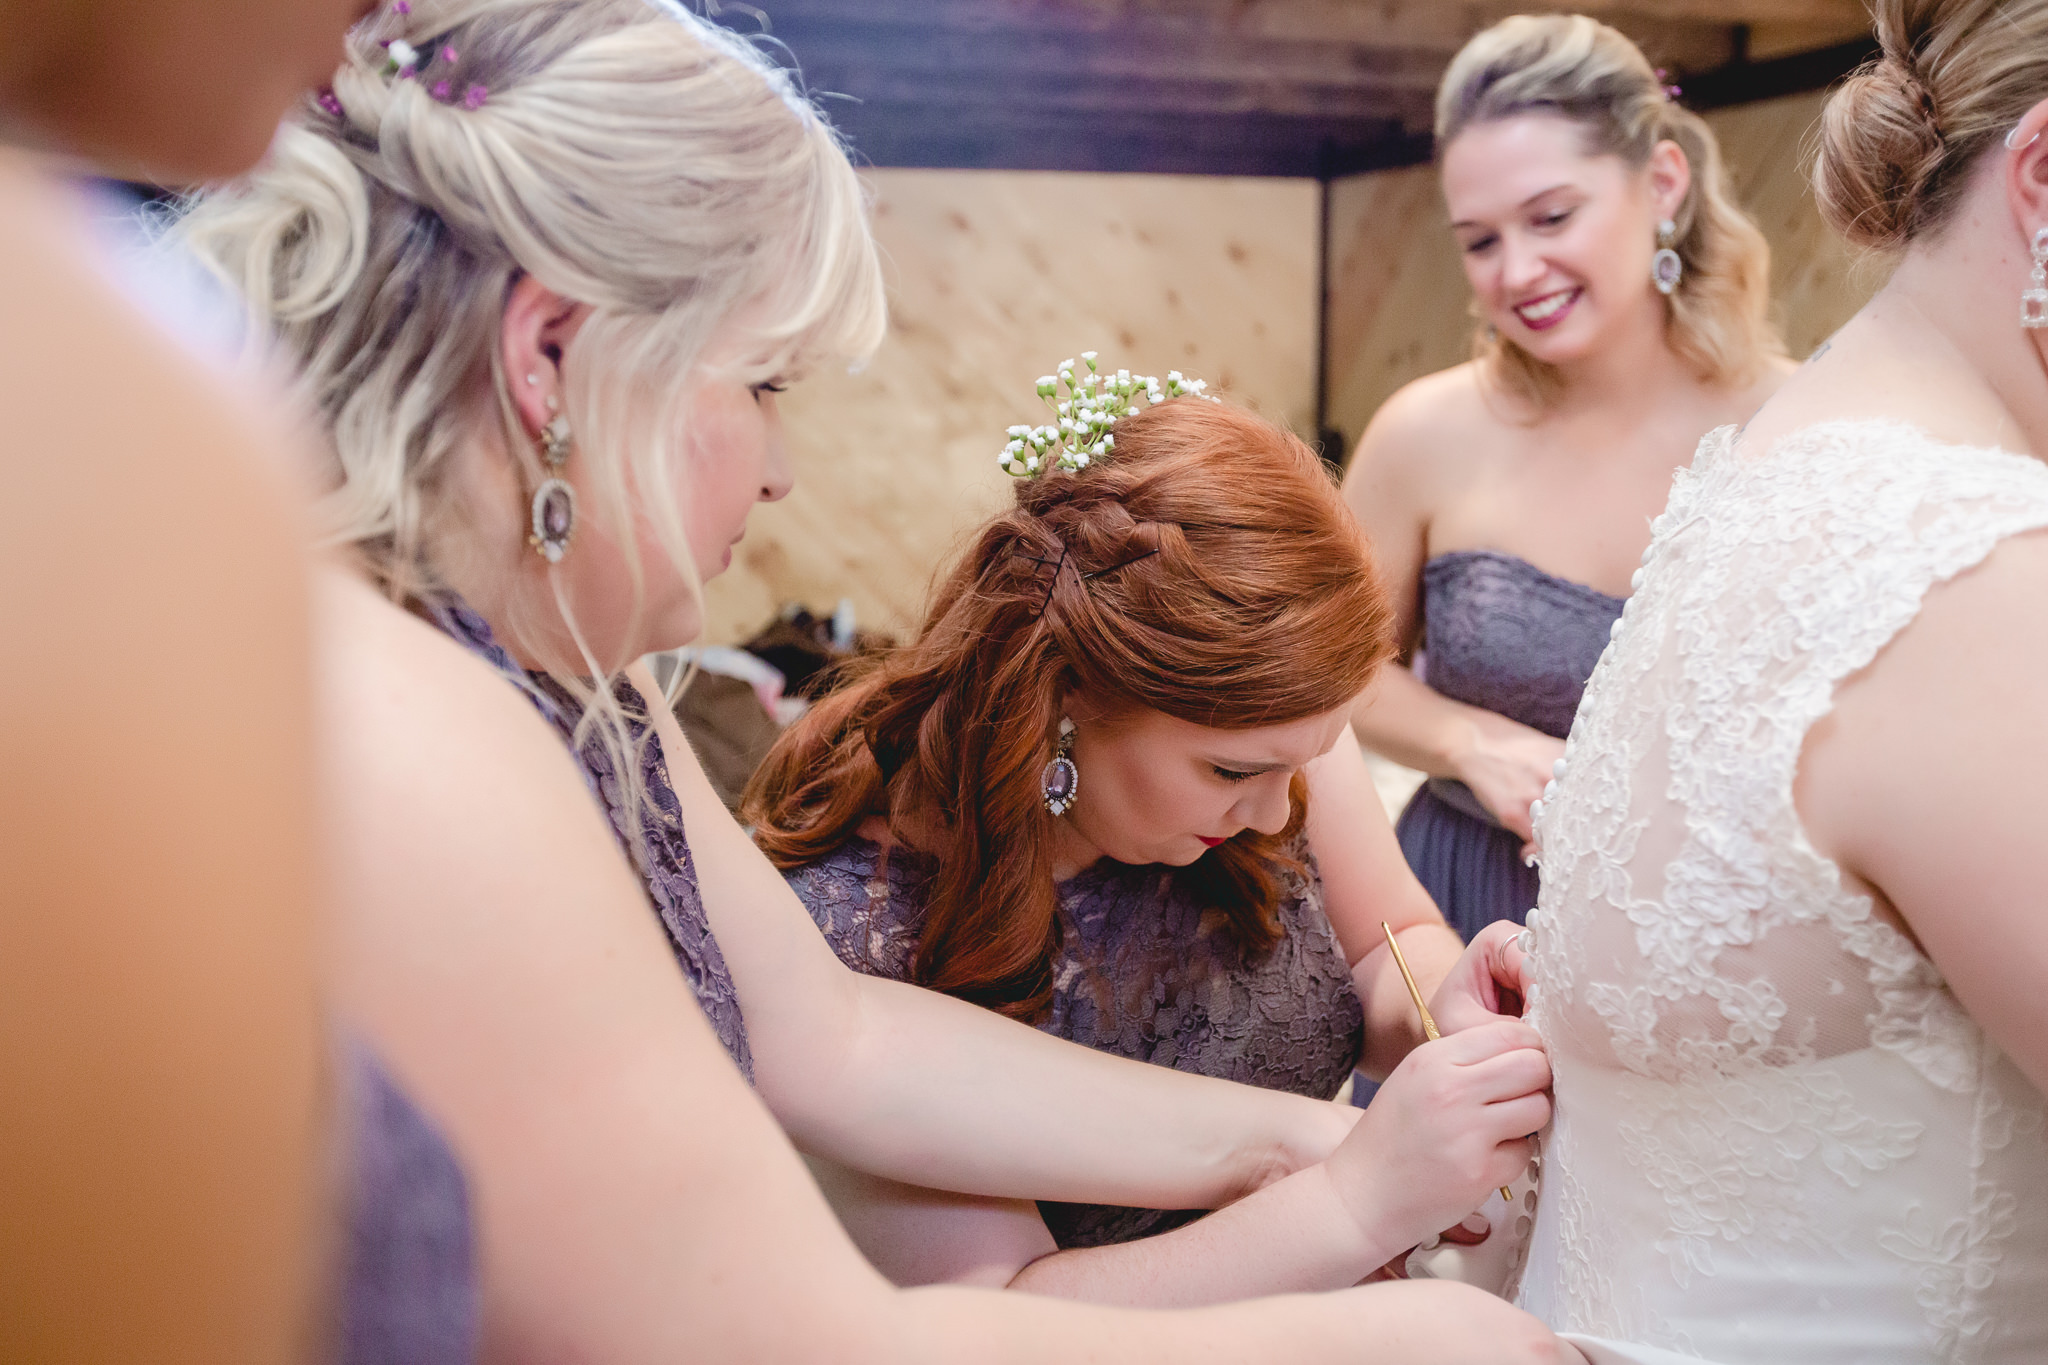 Maid of honor uses a crochet hook to button the bride's dress